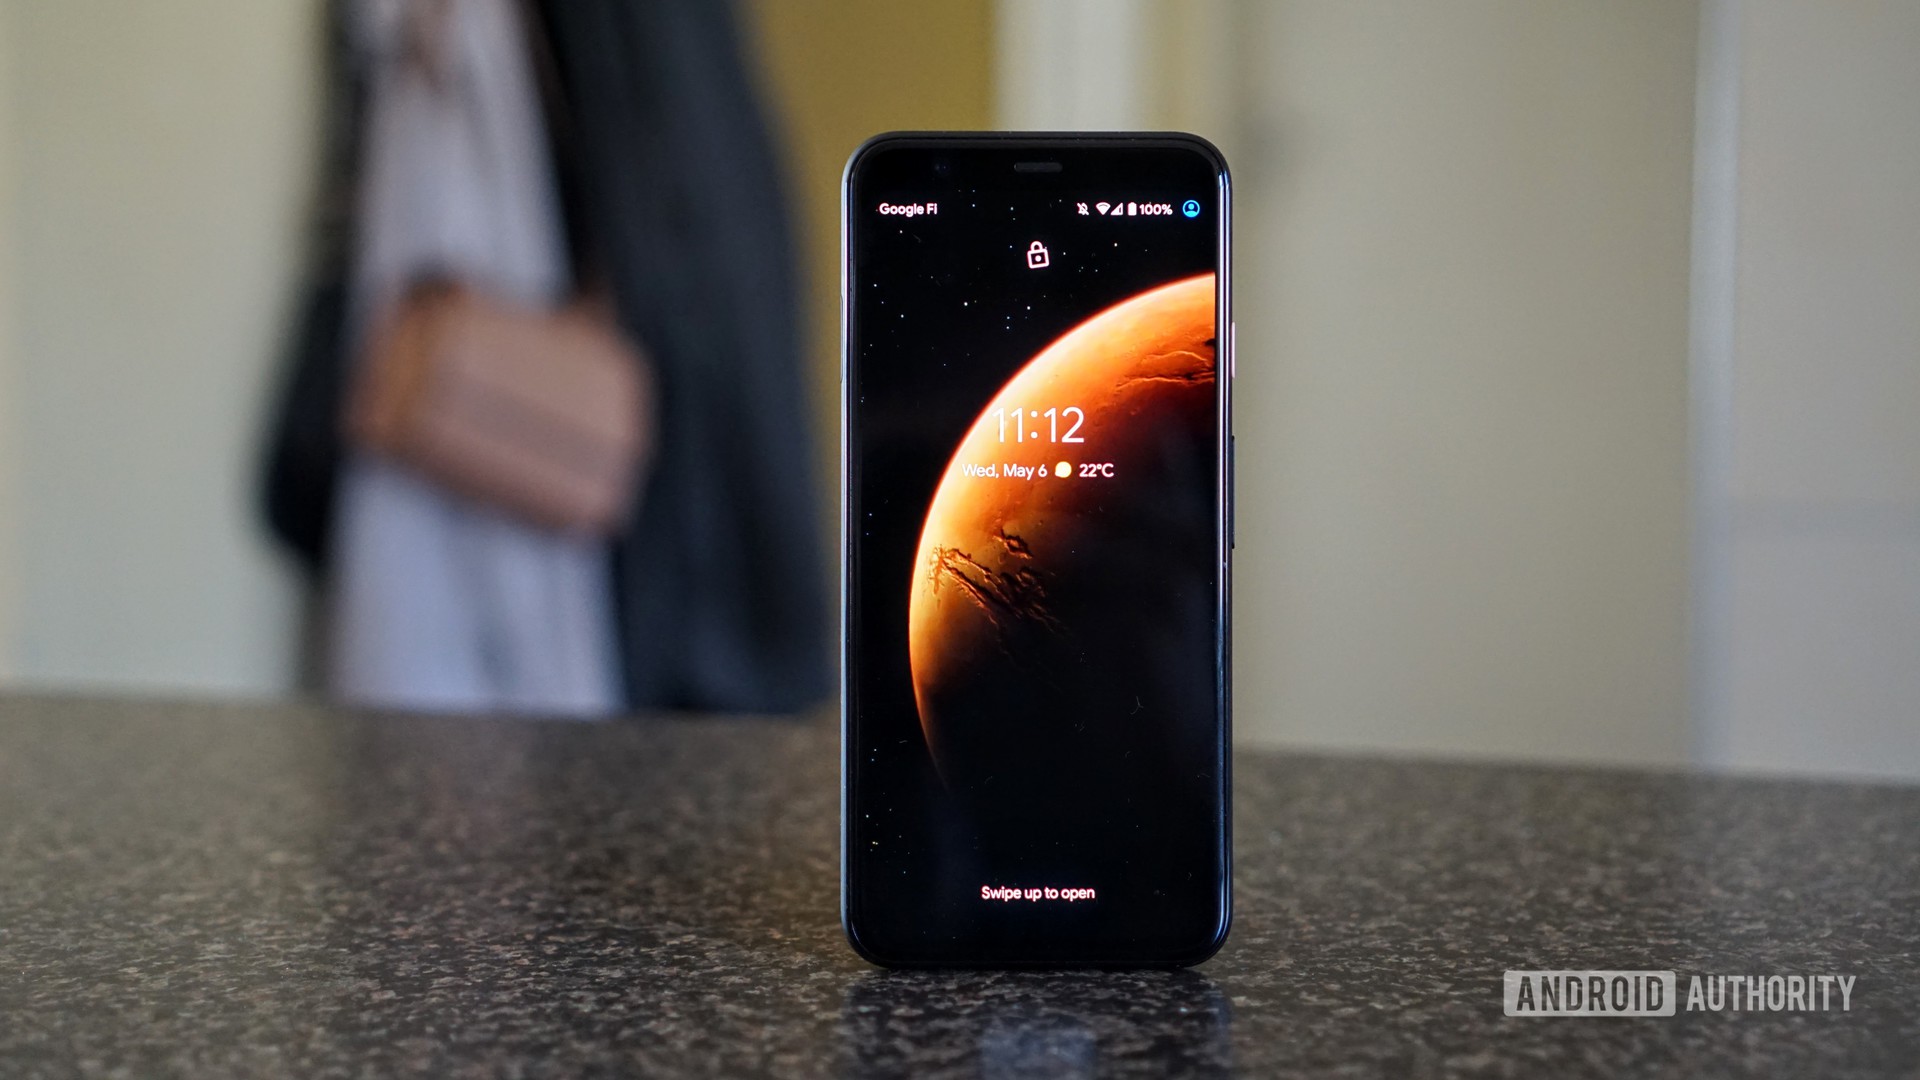 MIUI 12 super wallpapers on a Pixel 4.